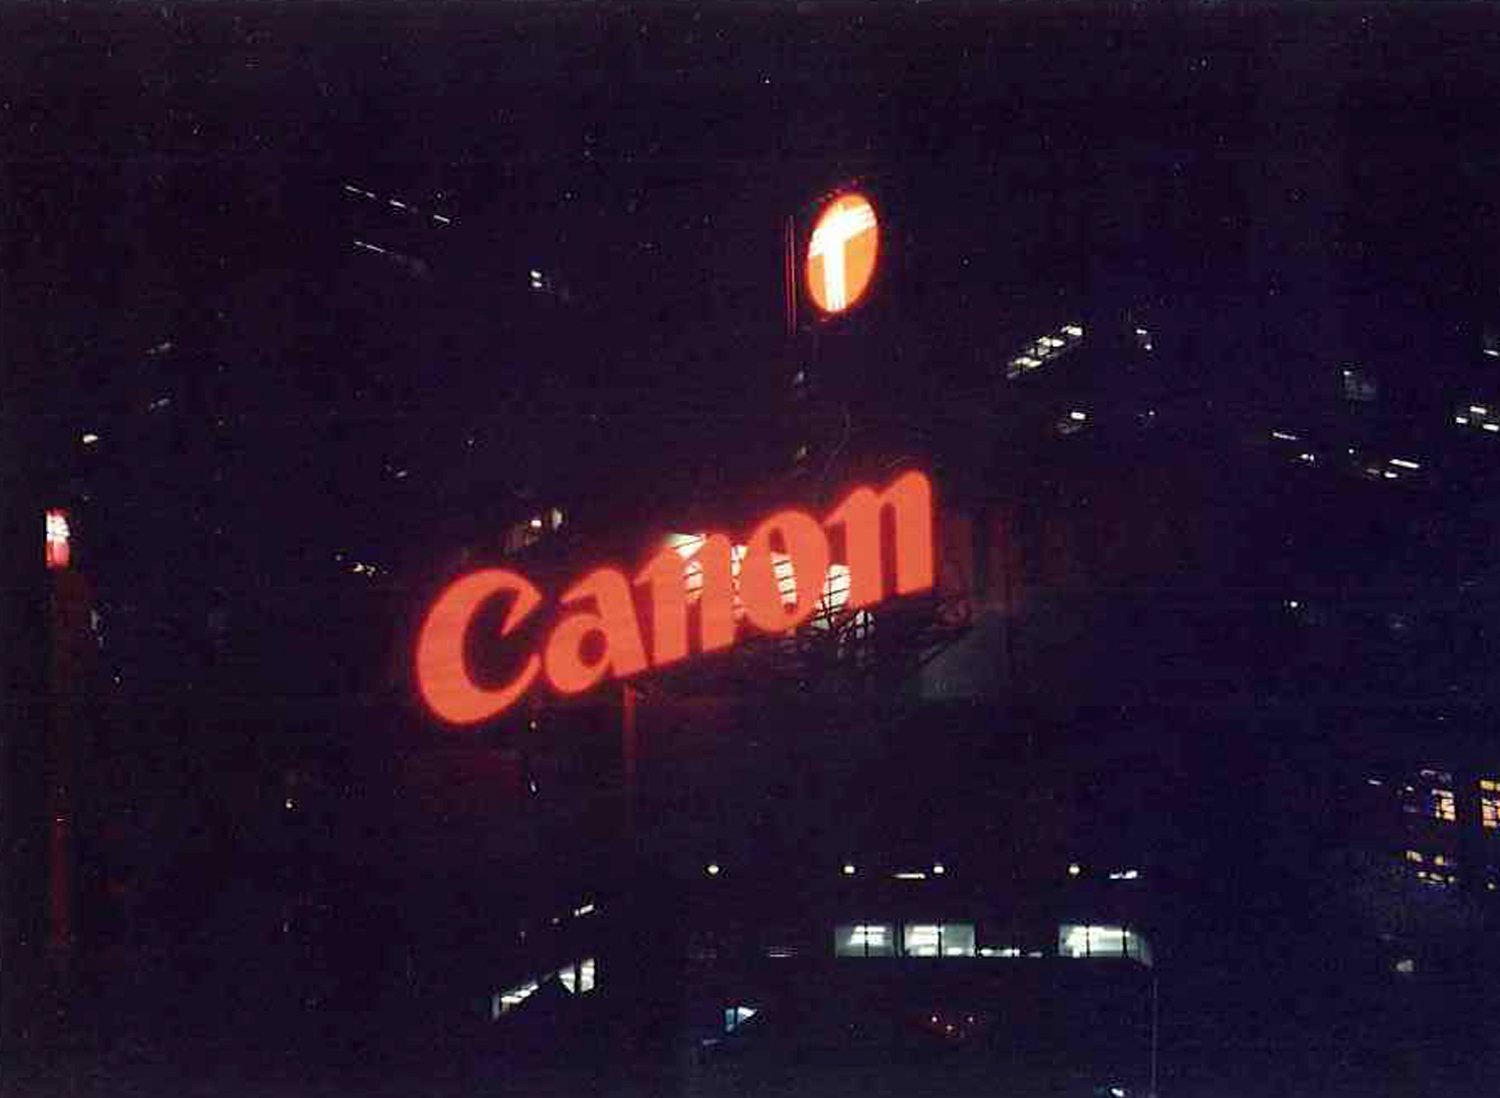 Installation of Canon's neon sign | NEONSIGNS.HK 探索霓虹